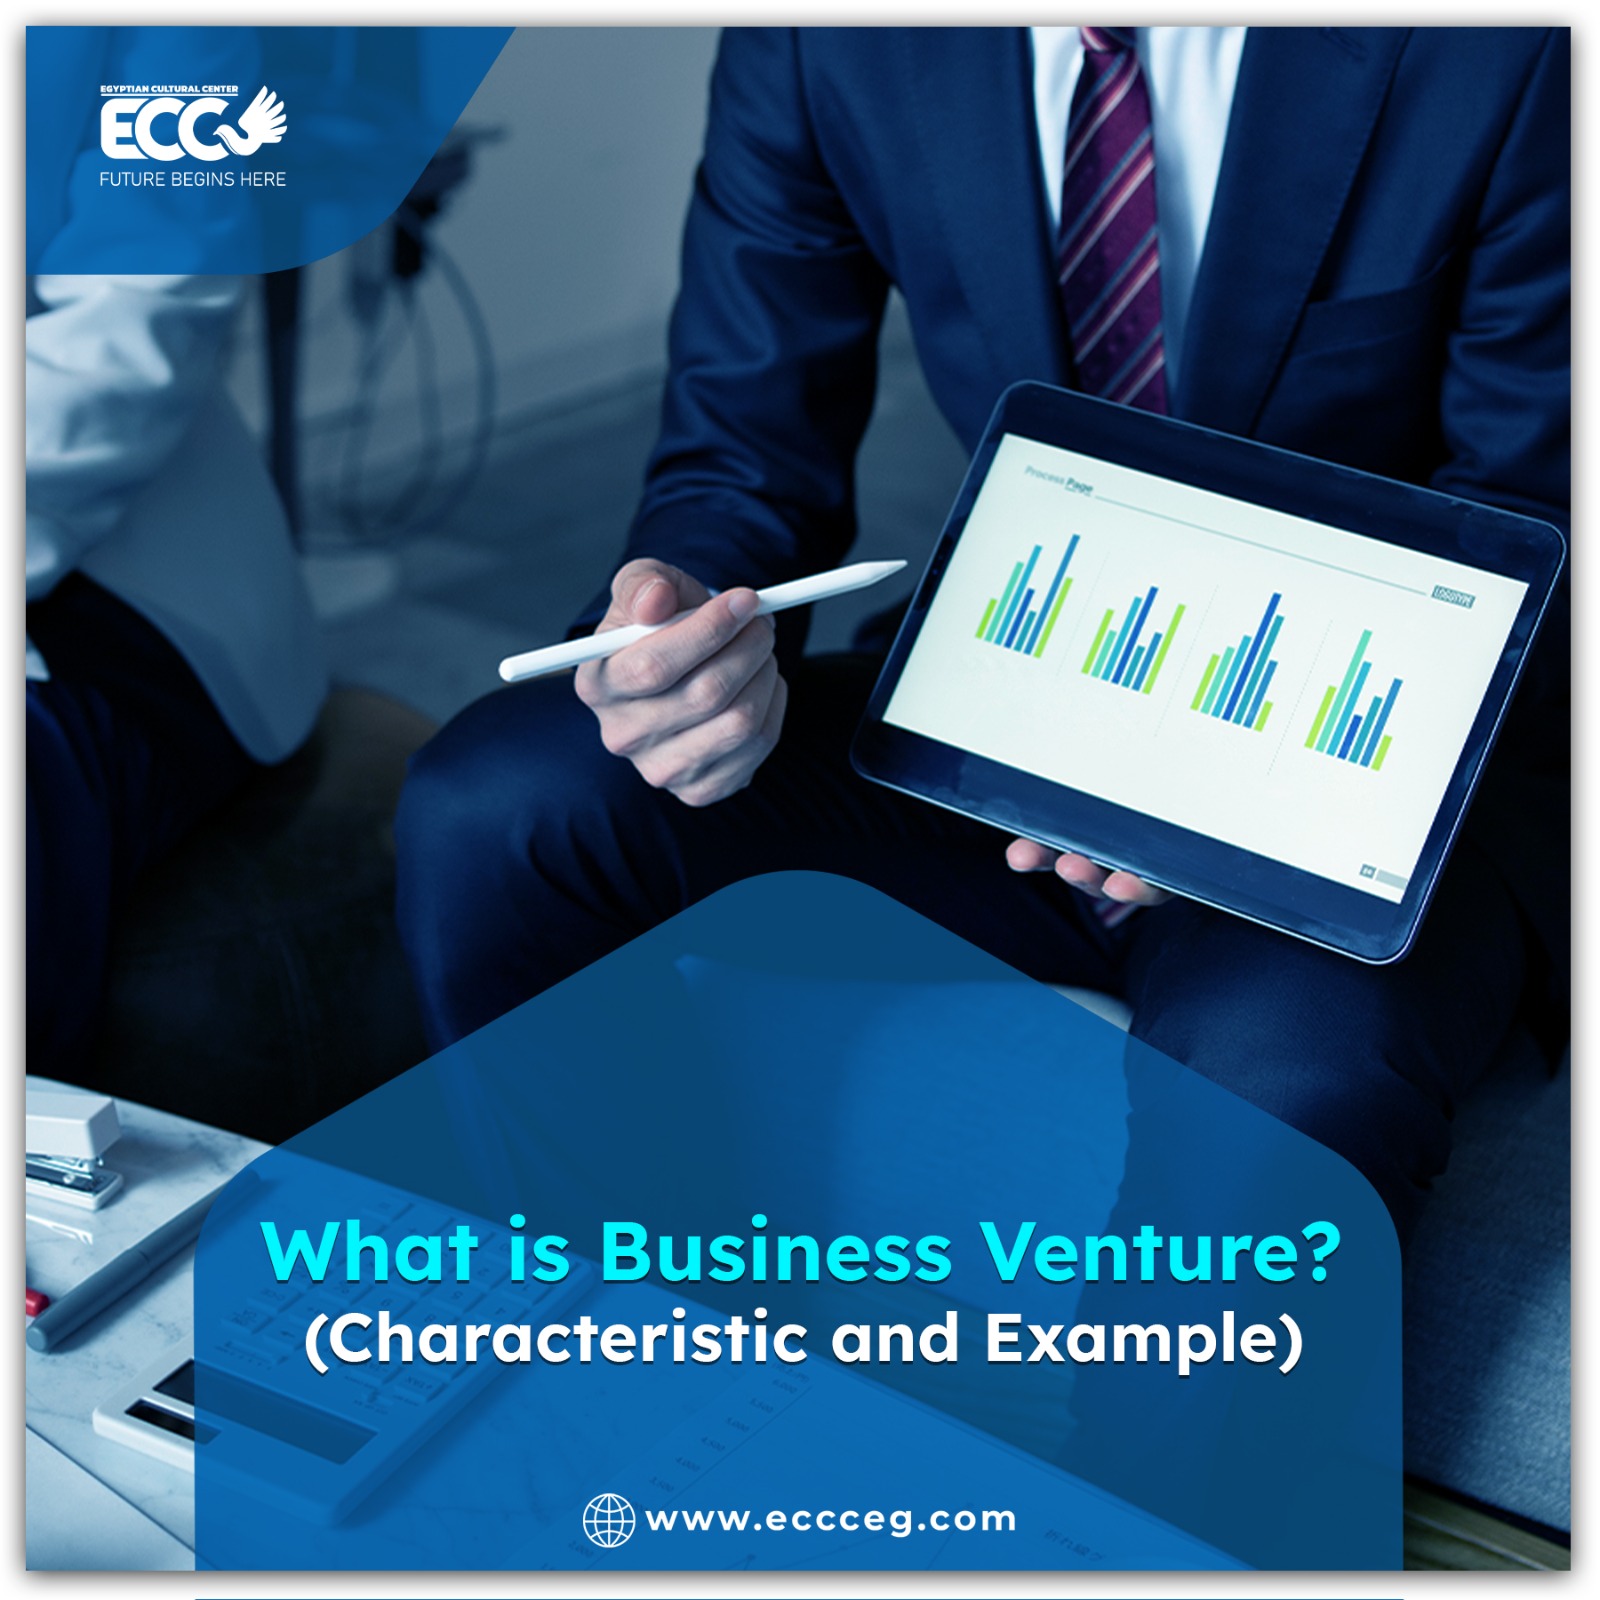 What is a business venture? Characteristics and examples